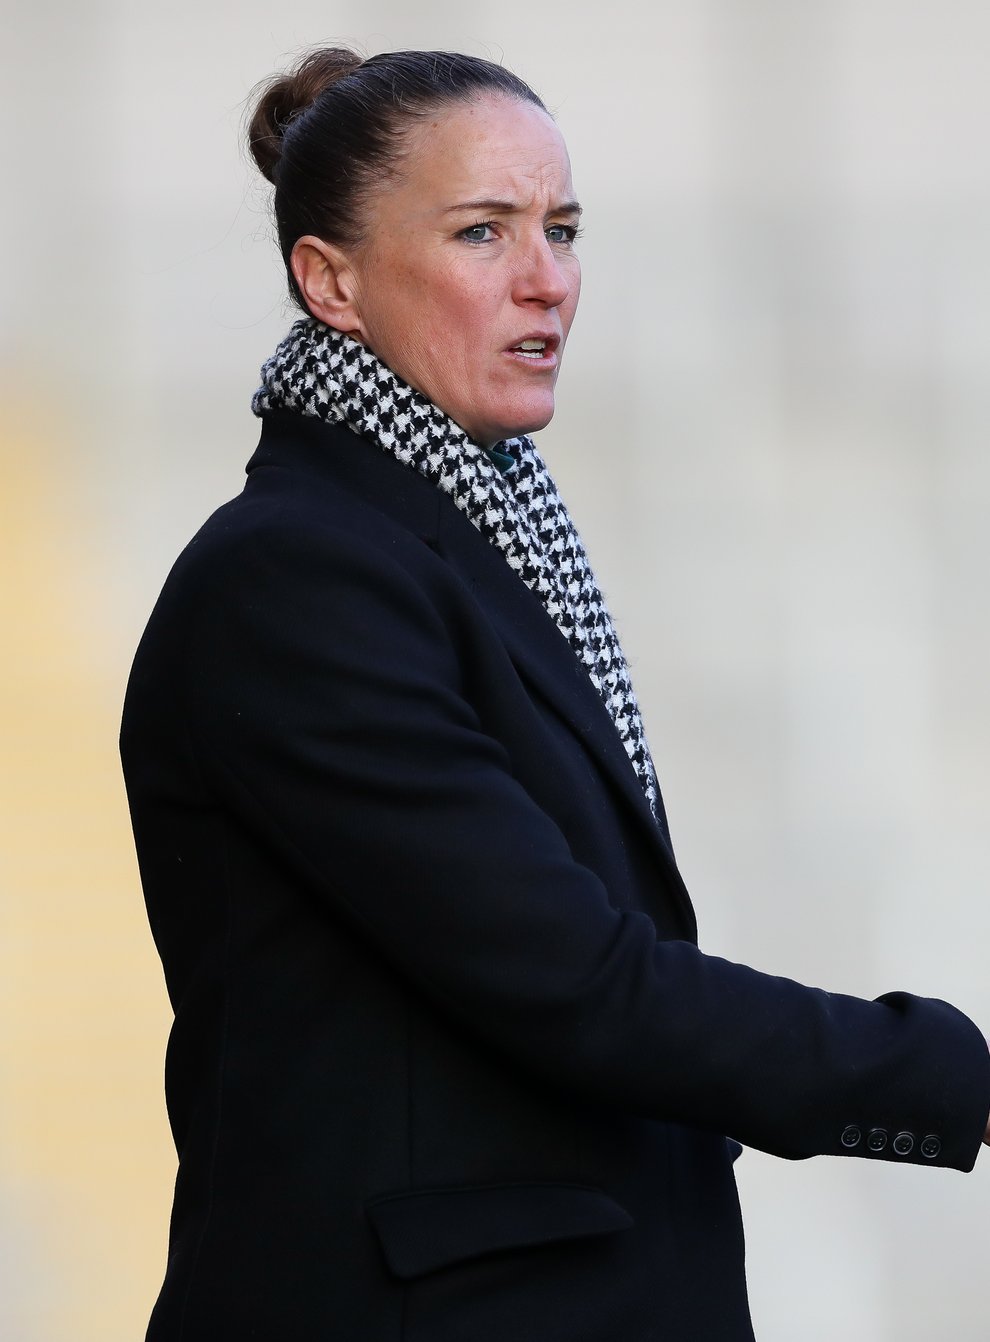 Casey Stoney has been in charge of Manchester United since 2018